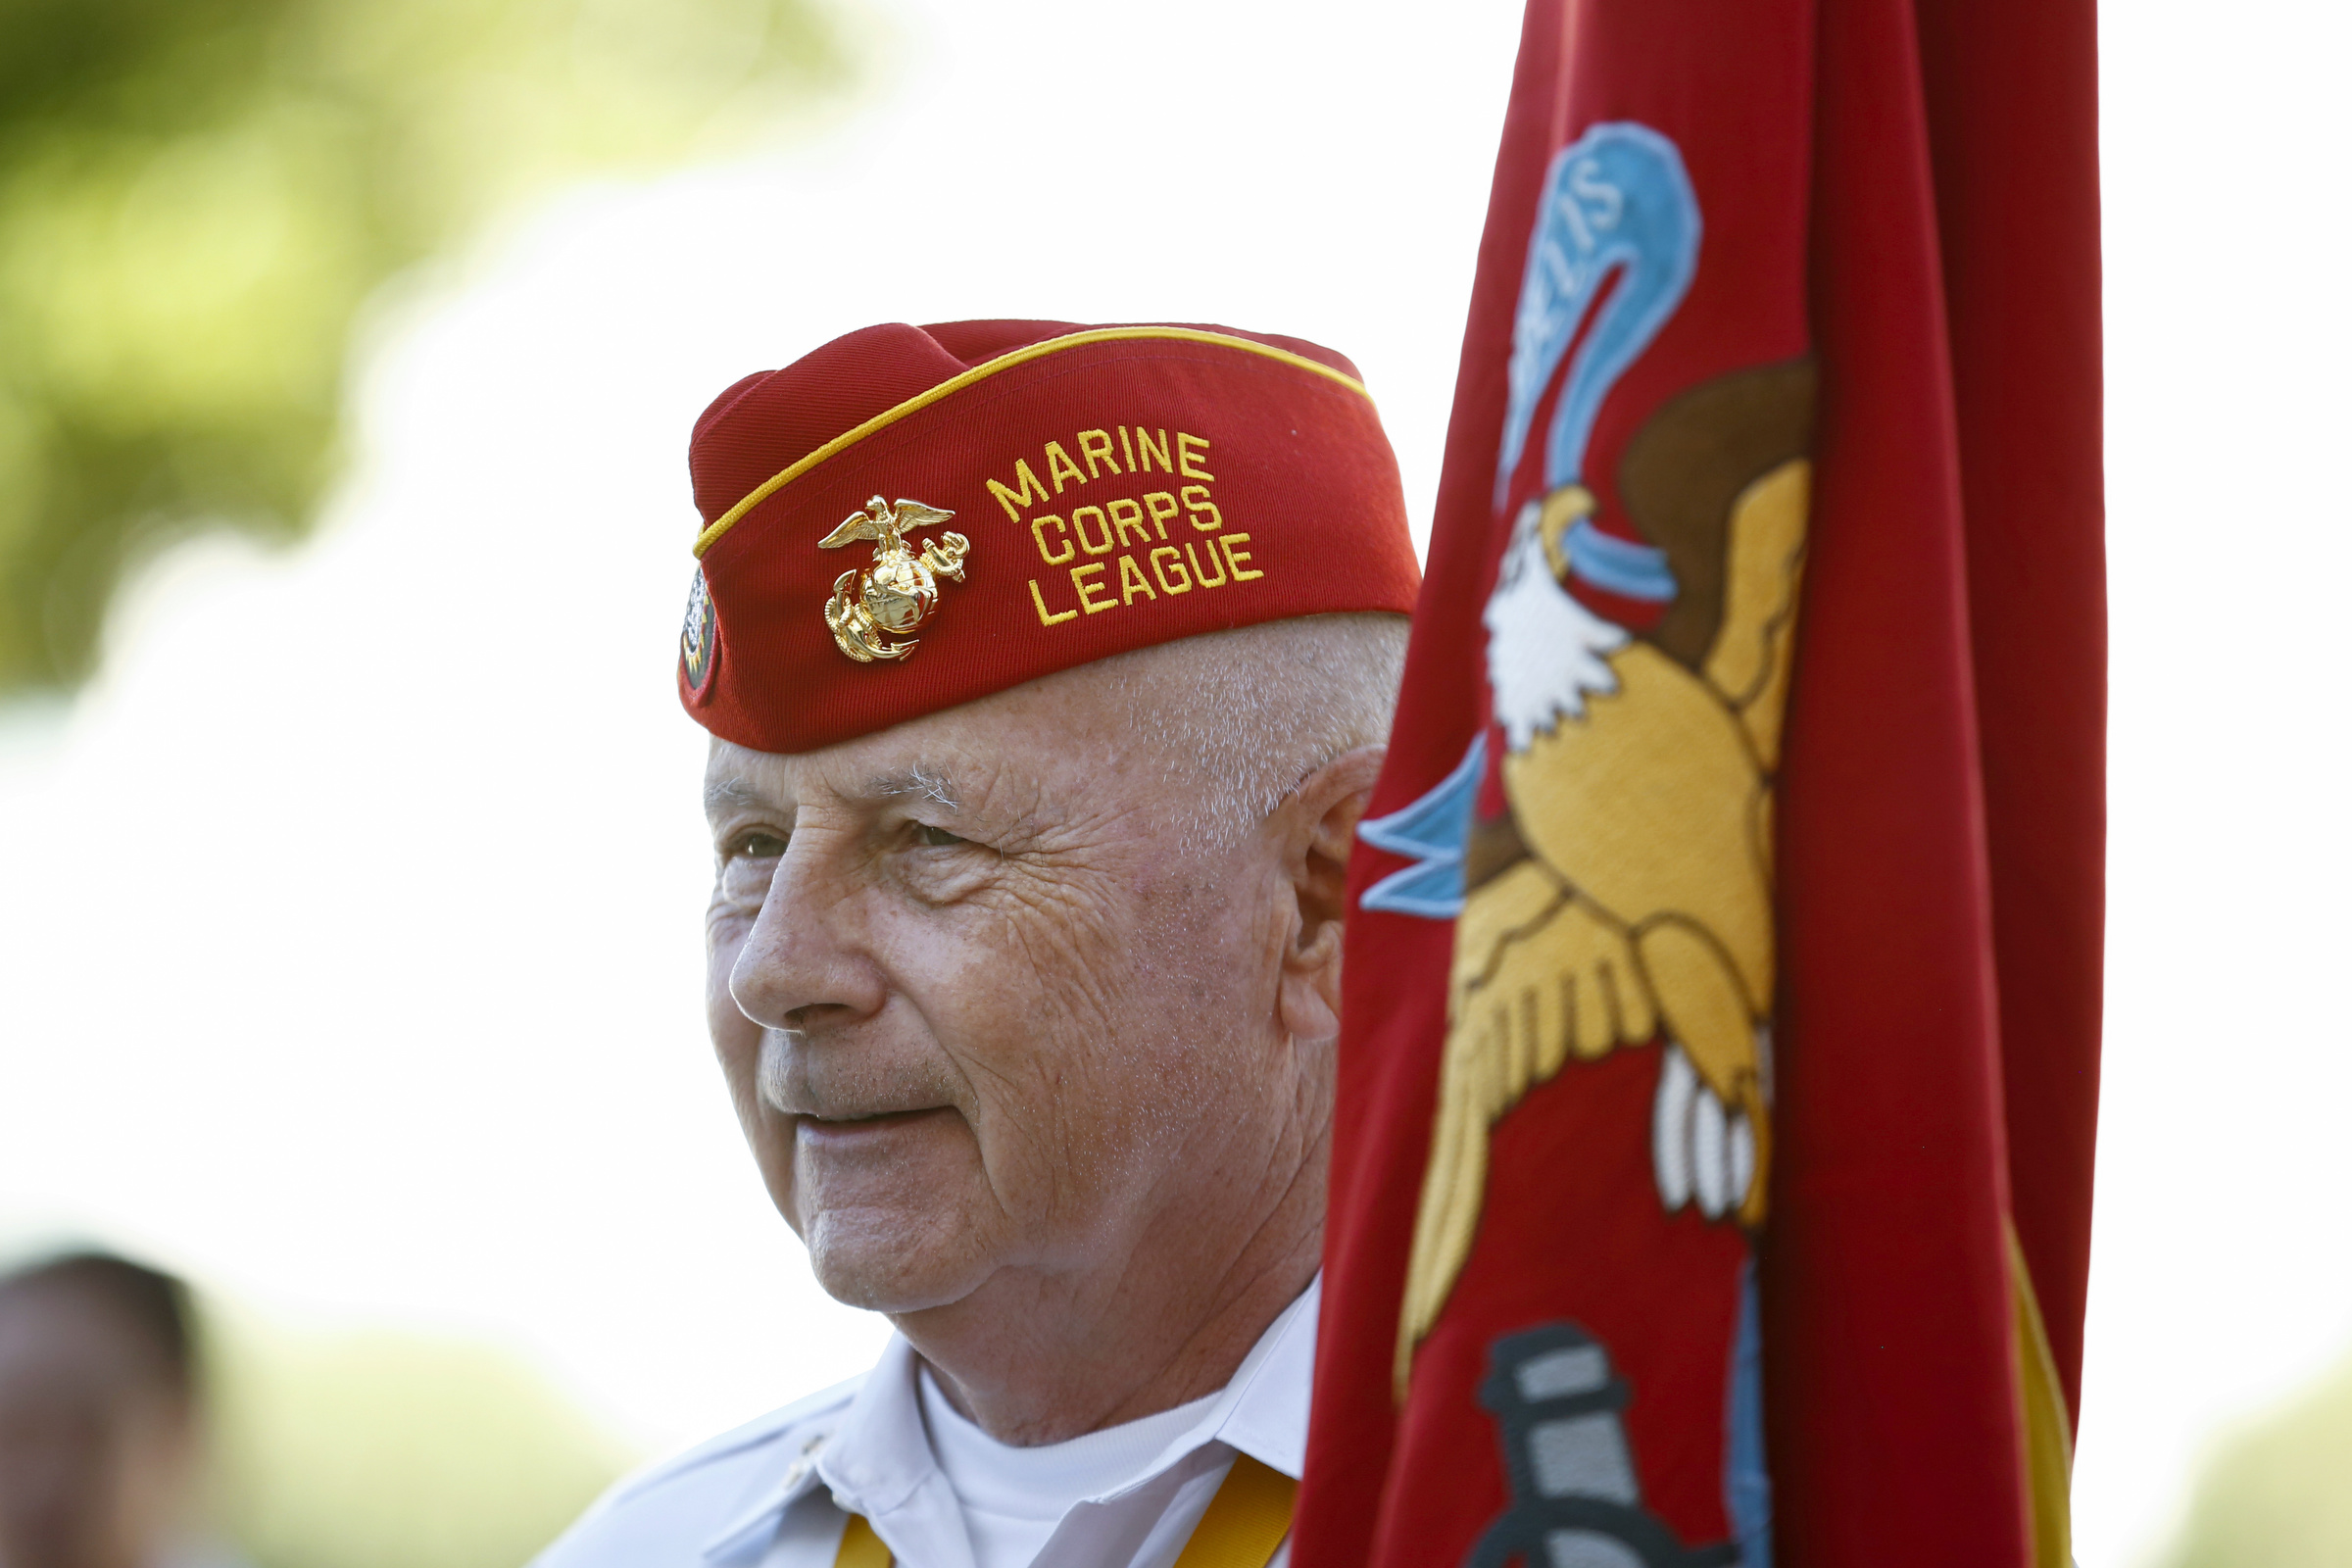 Veteran Gerry Schaller holds the Marine Corps flag following the sixth annual Red, White and Blue Mass at St. Thomas Aquinas Church in Avondale, Ariz., Nov. 6. The Diocese of Phoenix marked the occasion to honor active and retired service men and women and to recall those who died in service to the country. Veterans Day is Nov. 11. (CNS photo/Nancy Wiechec)